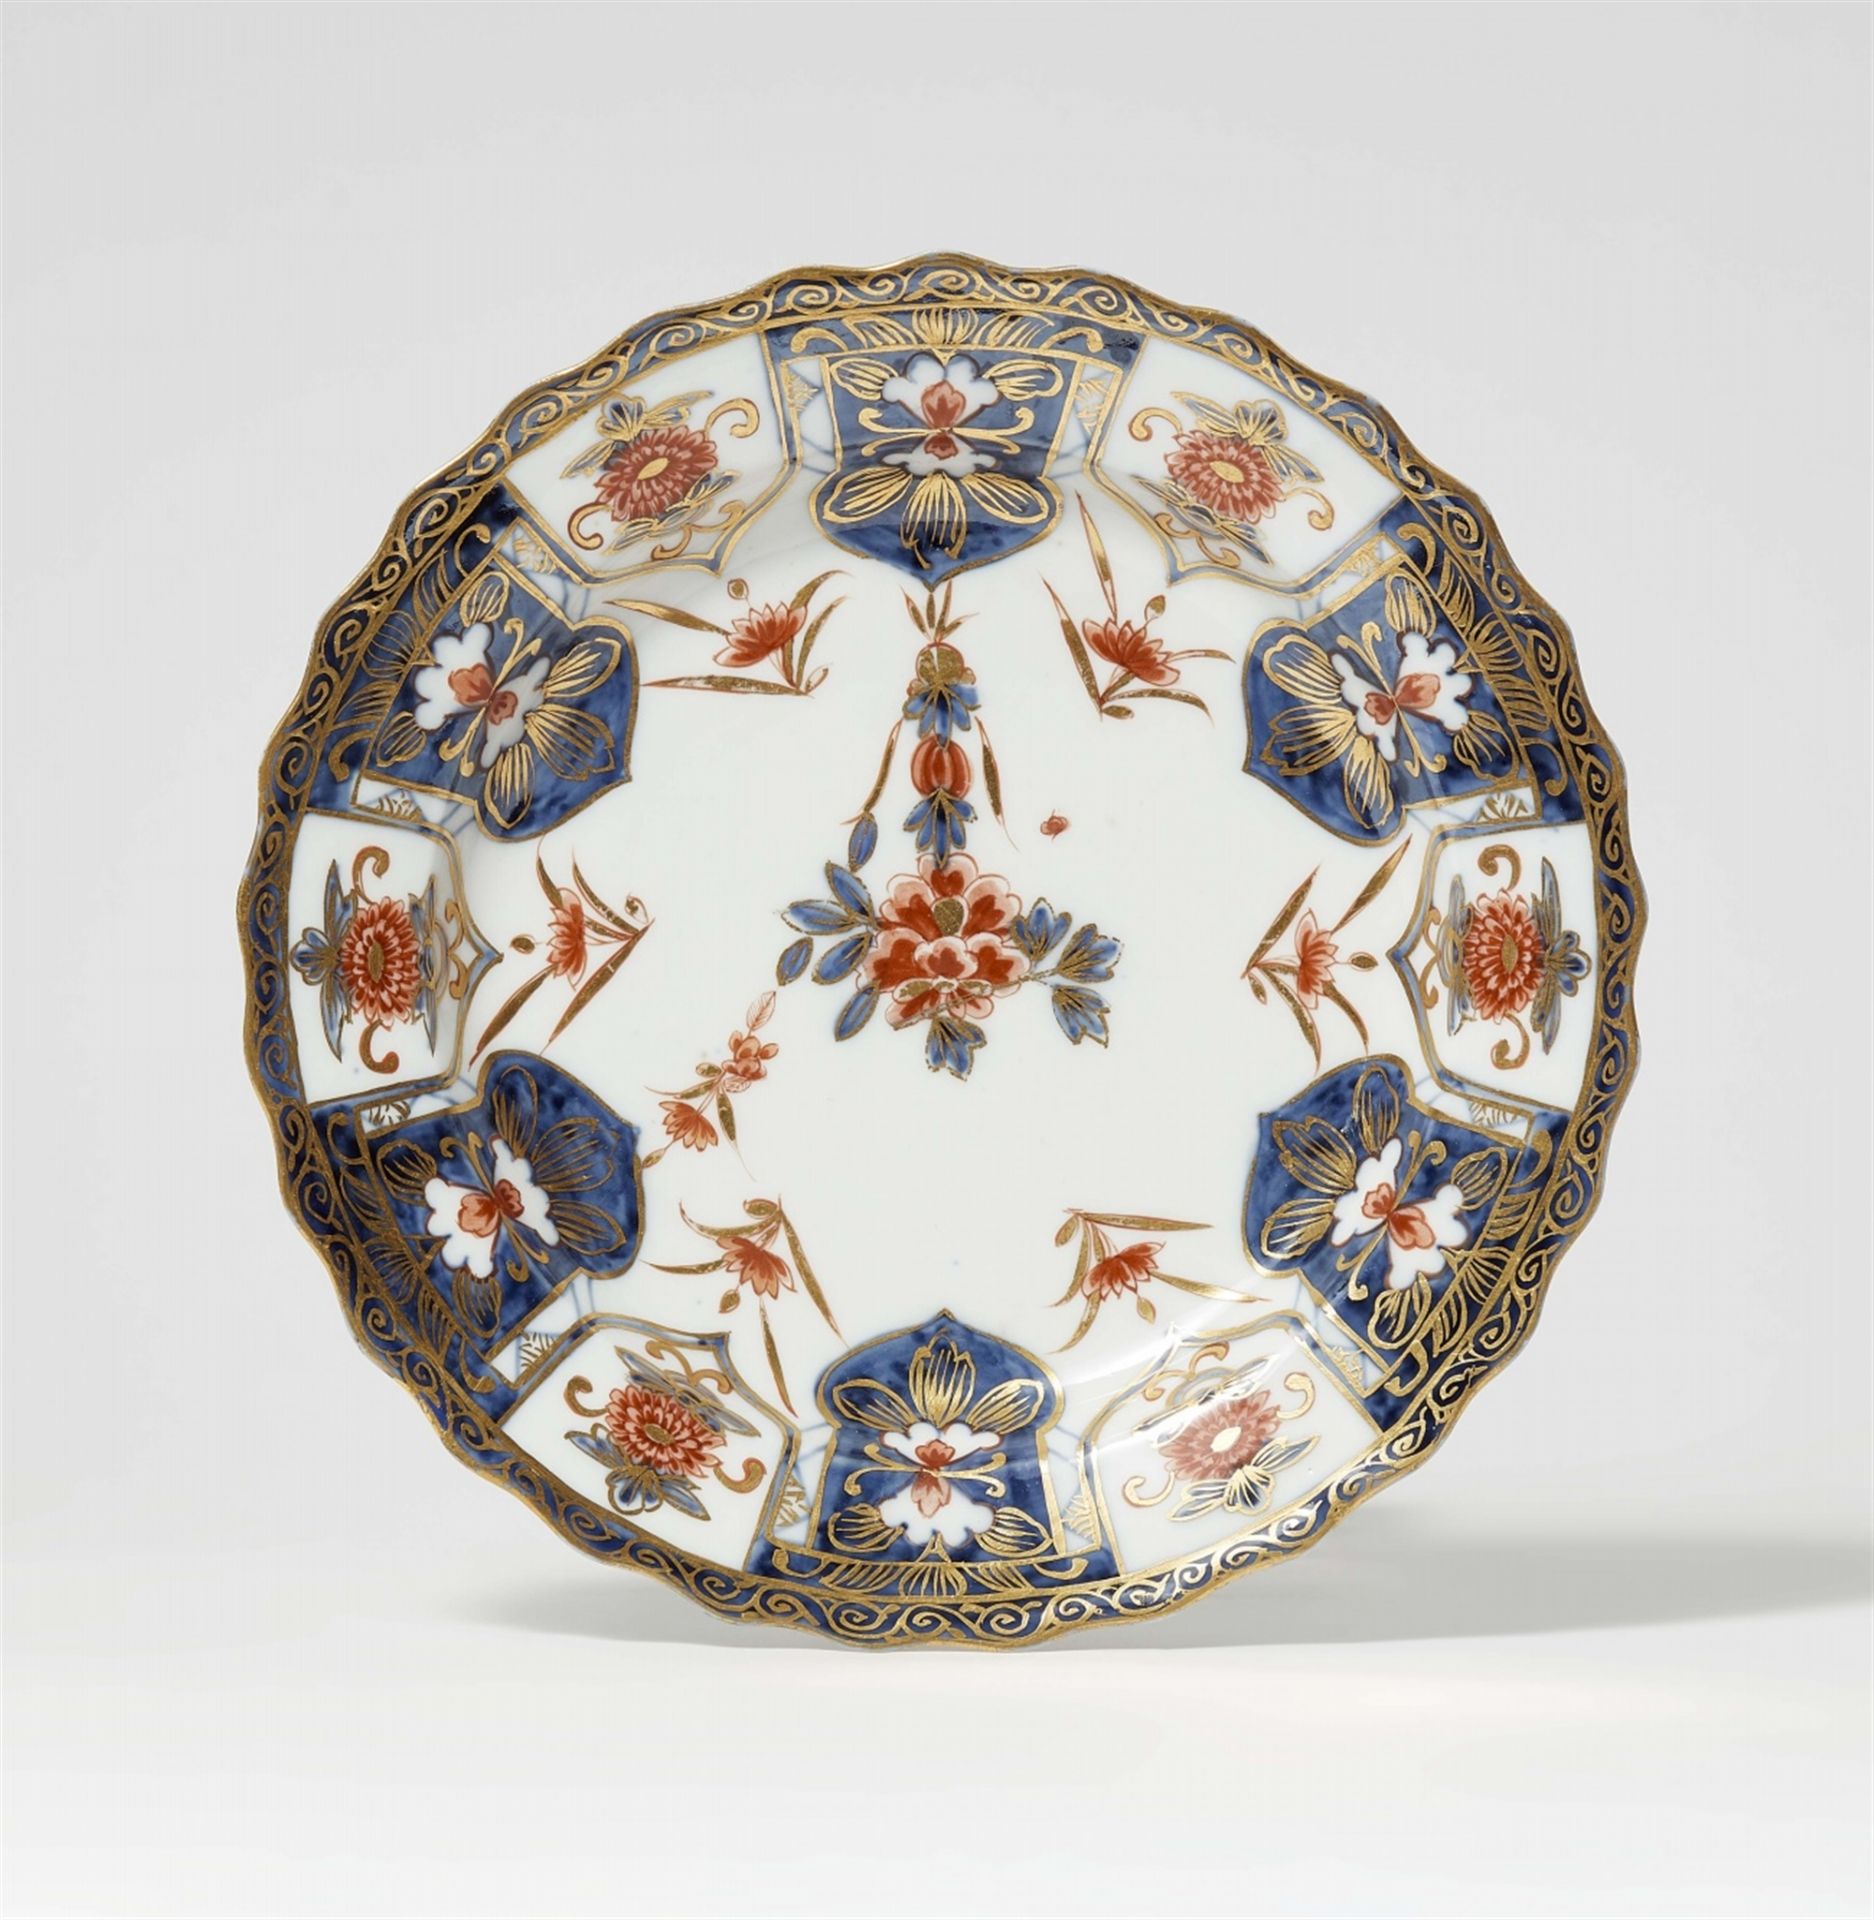 A Meissen porcelain plate with Japanese style lambrequin motifs